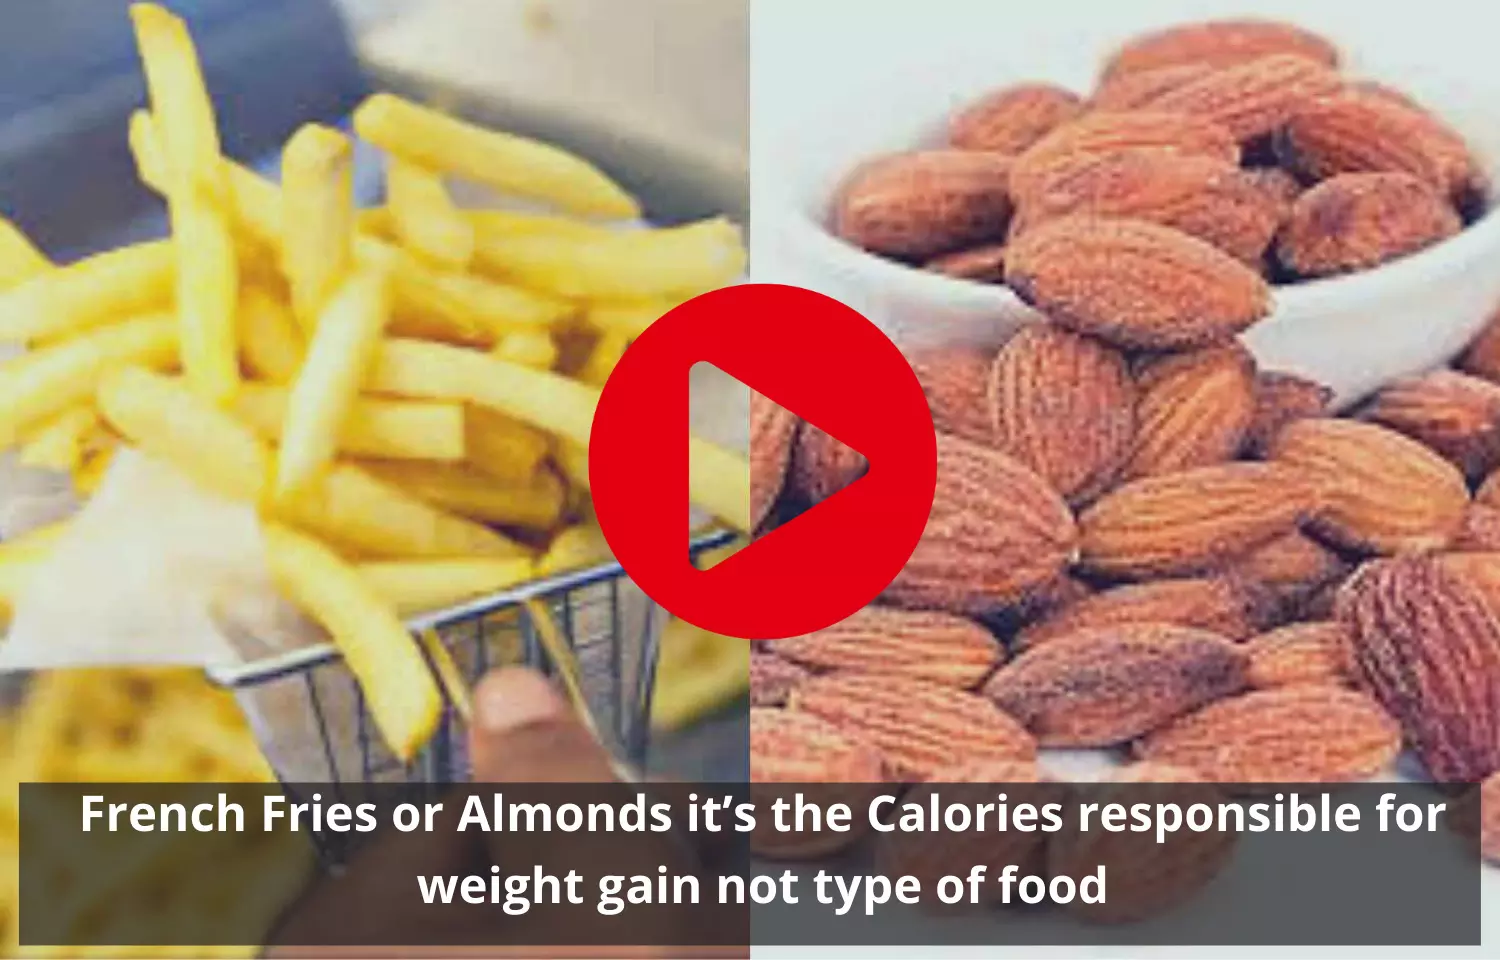 Calories responsible for weight gain not type of food, whether its french fries or almonds